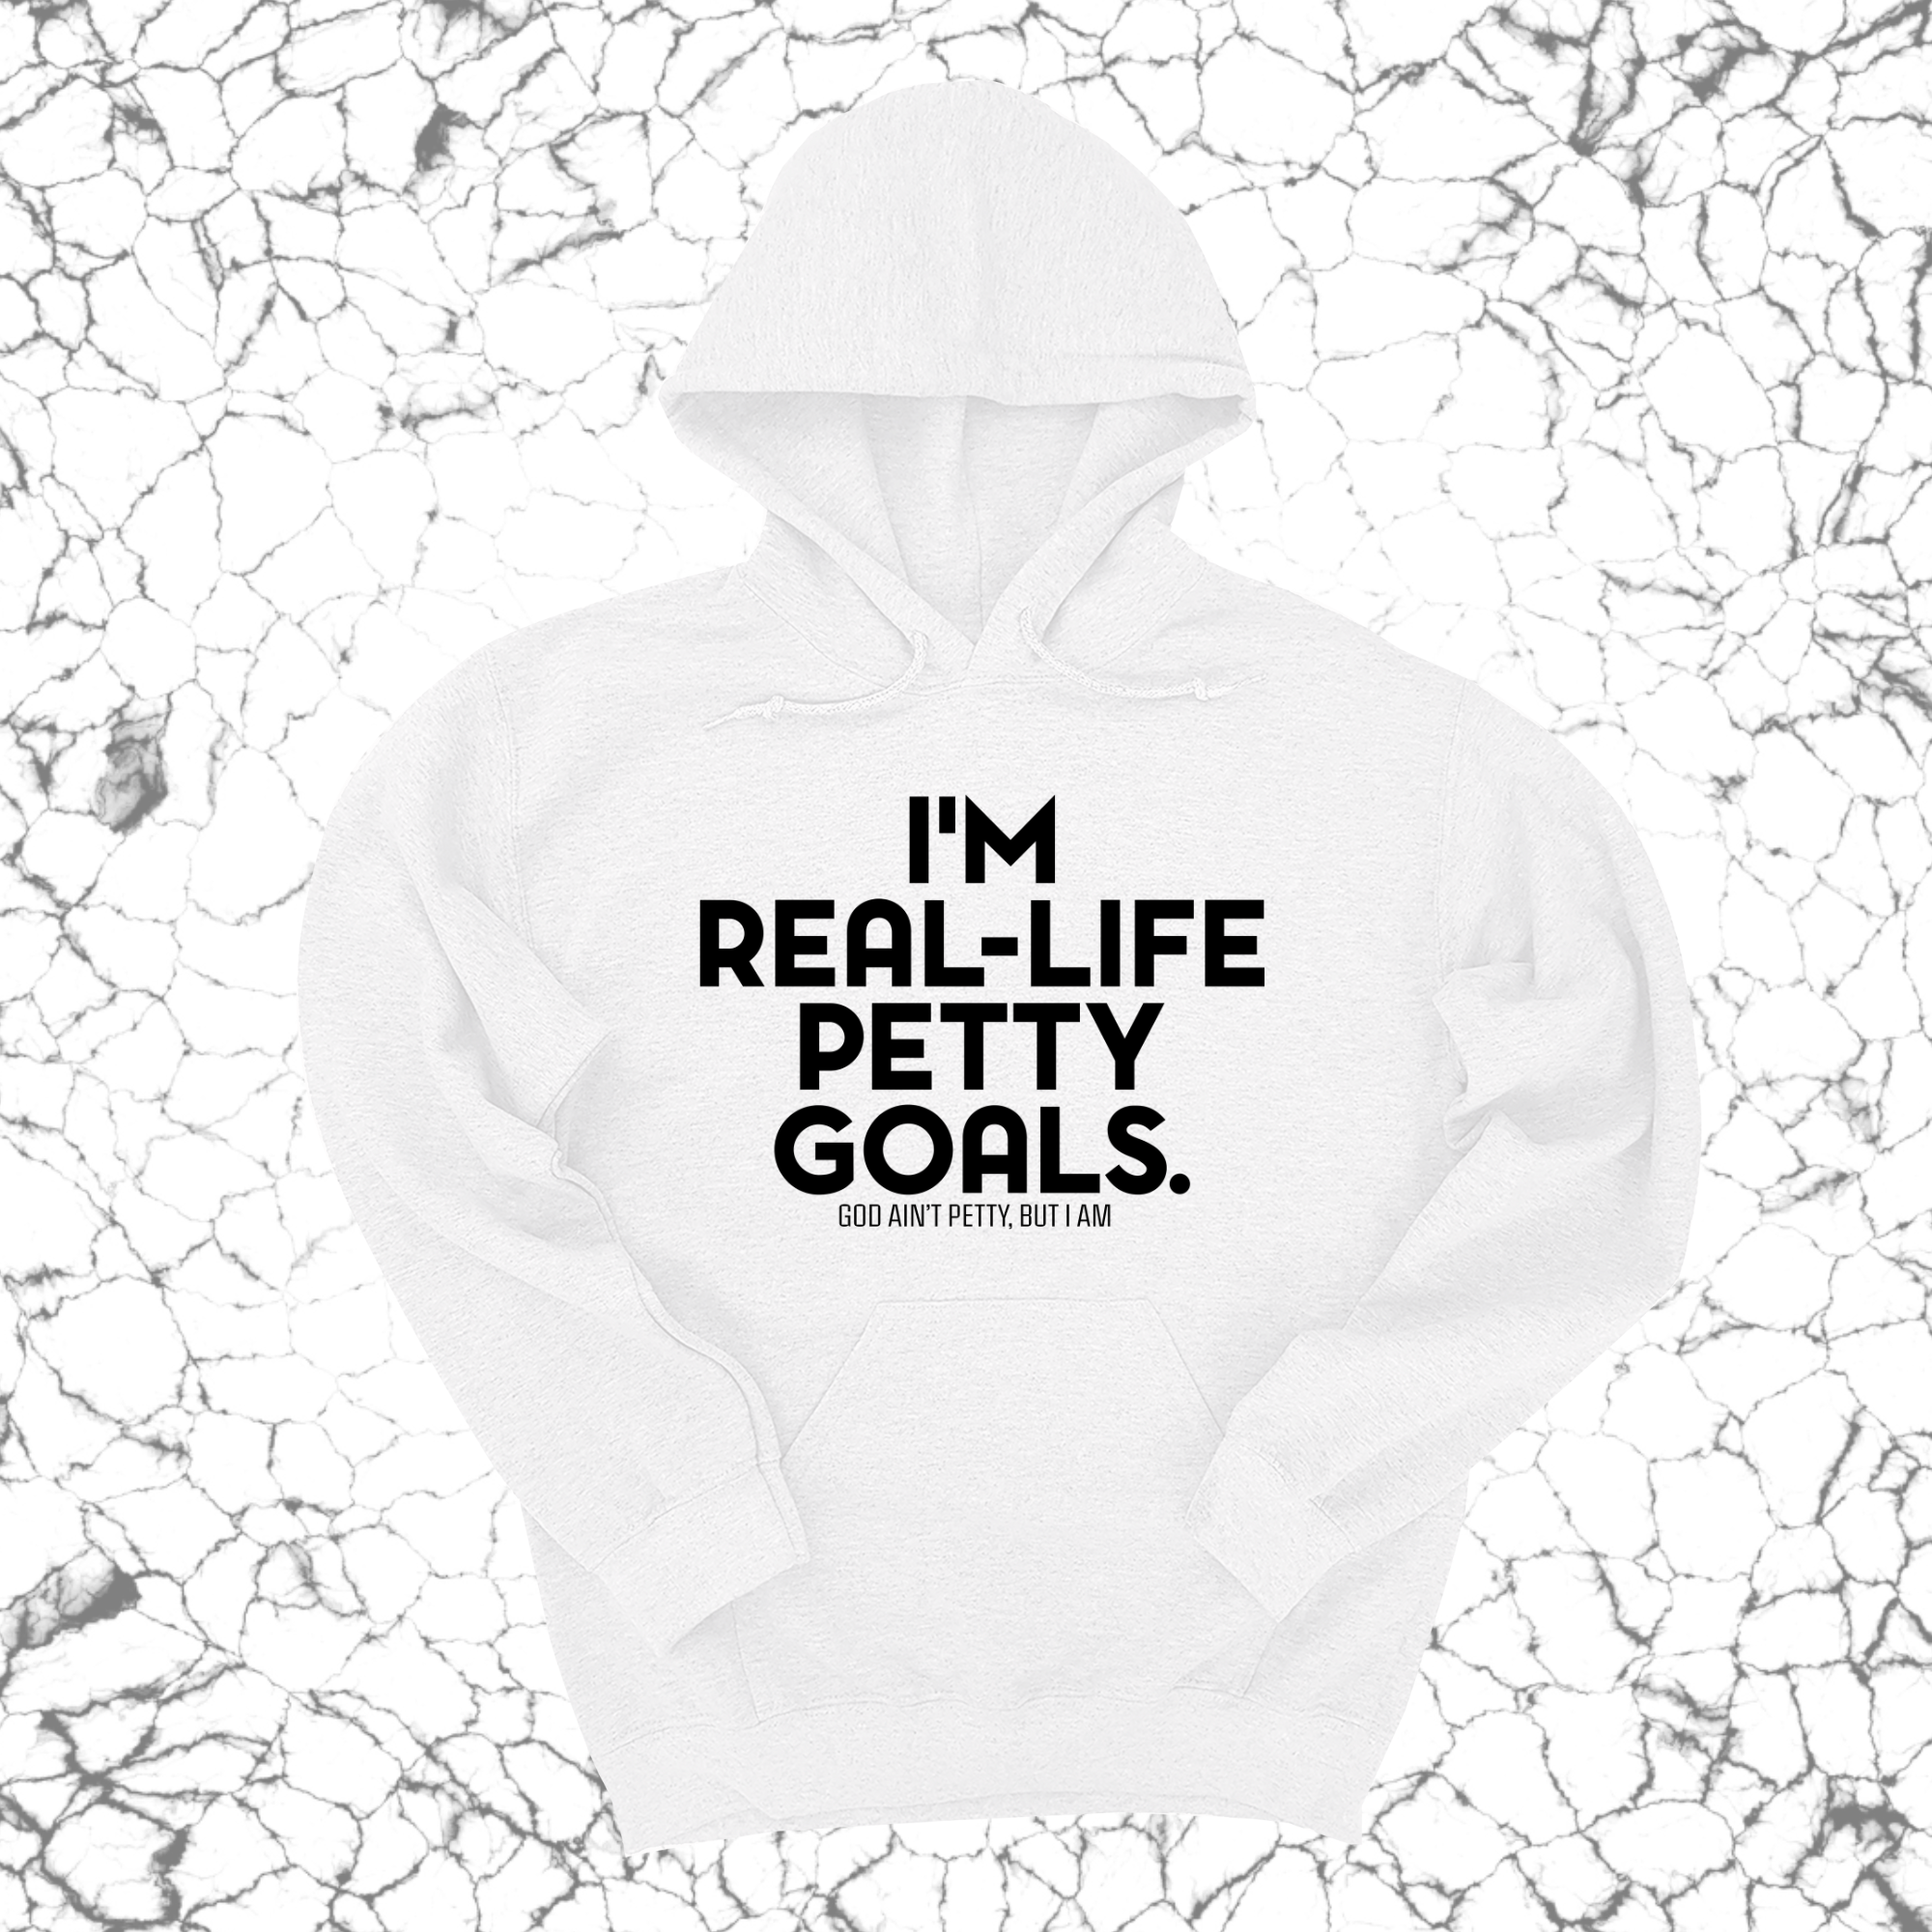 I'm real-life petty goals Unisex Hoodie-Hoodie-The Original God Ain't Petty But I Am